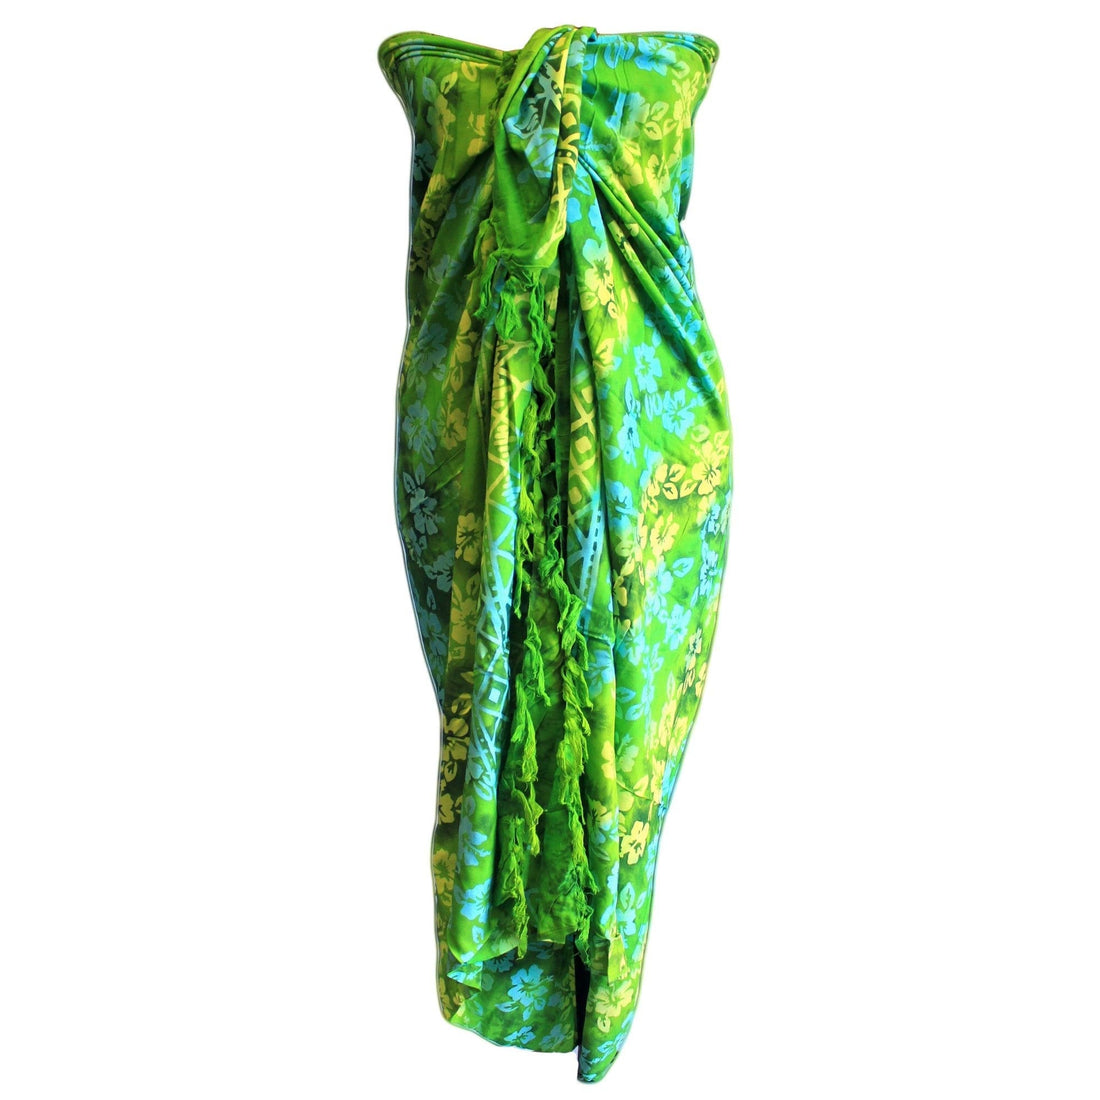 Bali Block Print Sarong - Orchids (4 Assorted Colours) - best price from Maltashopper.com BBP-02DS